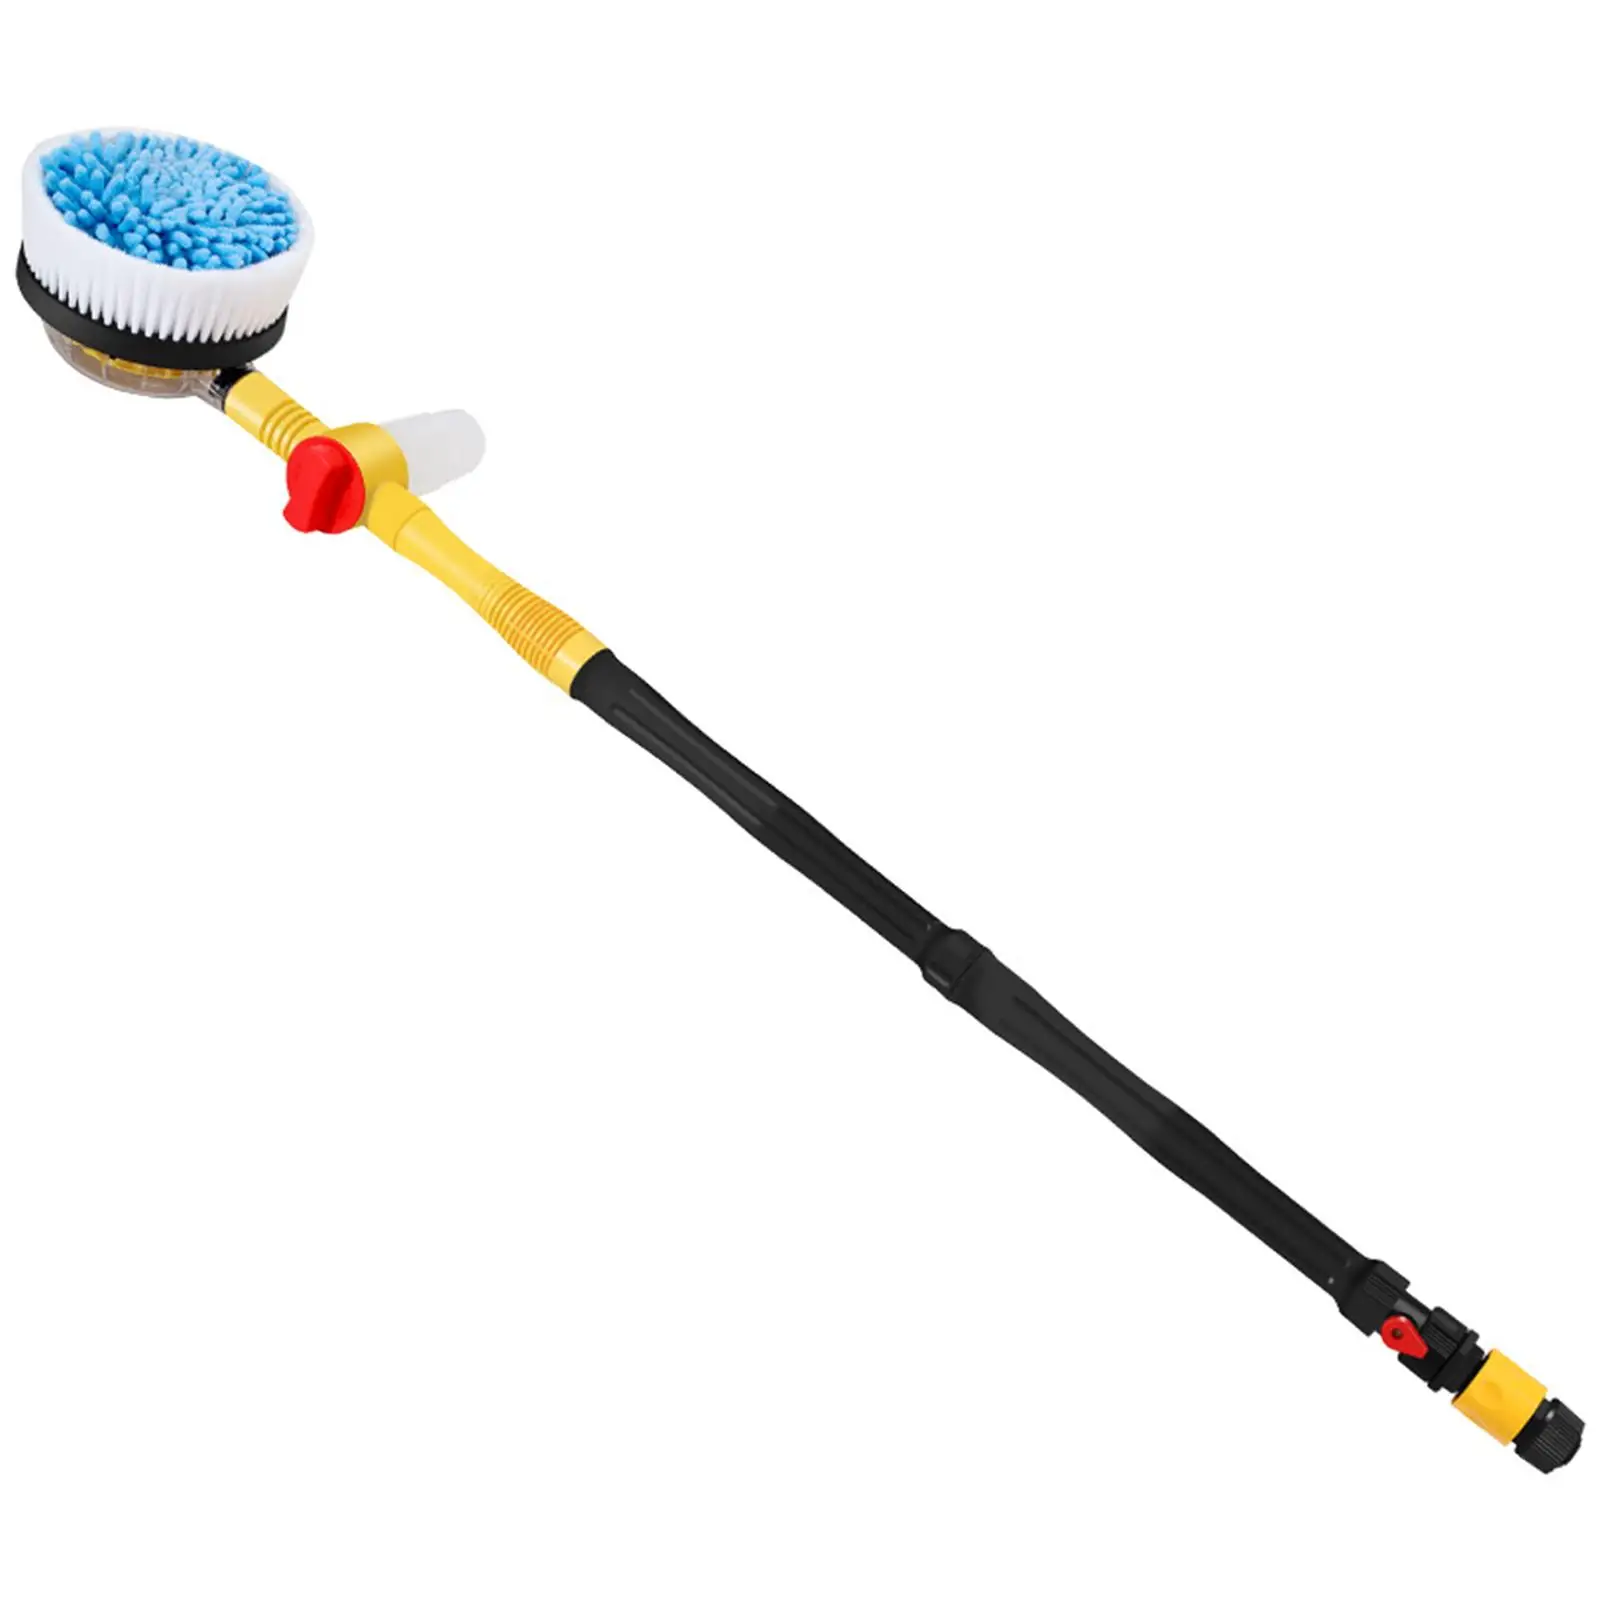 Car Rotary Wash Brush Kit Microfiber Quick Connect Adjustable 360 Degree High